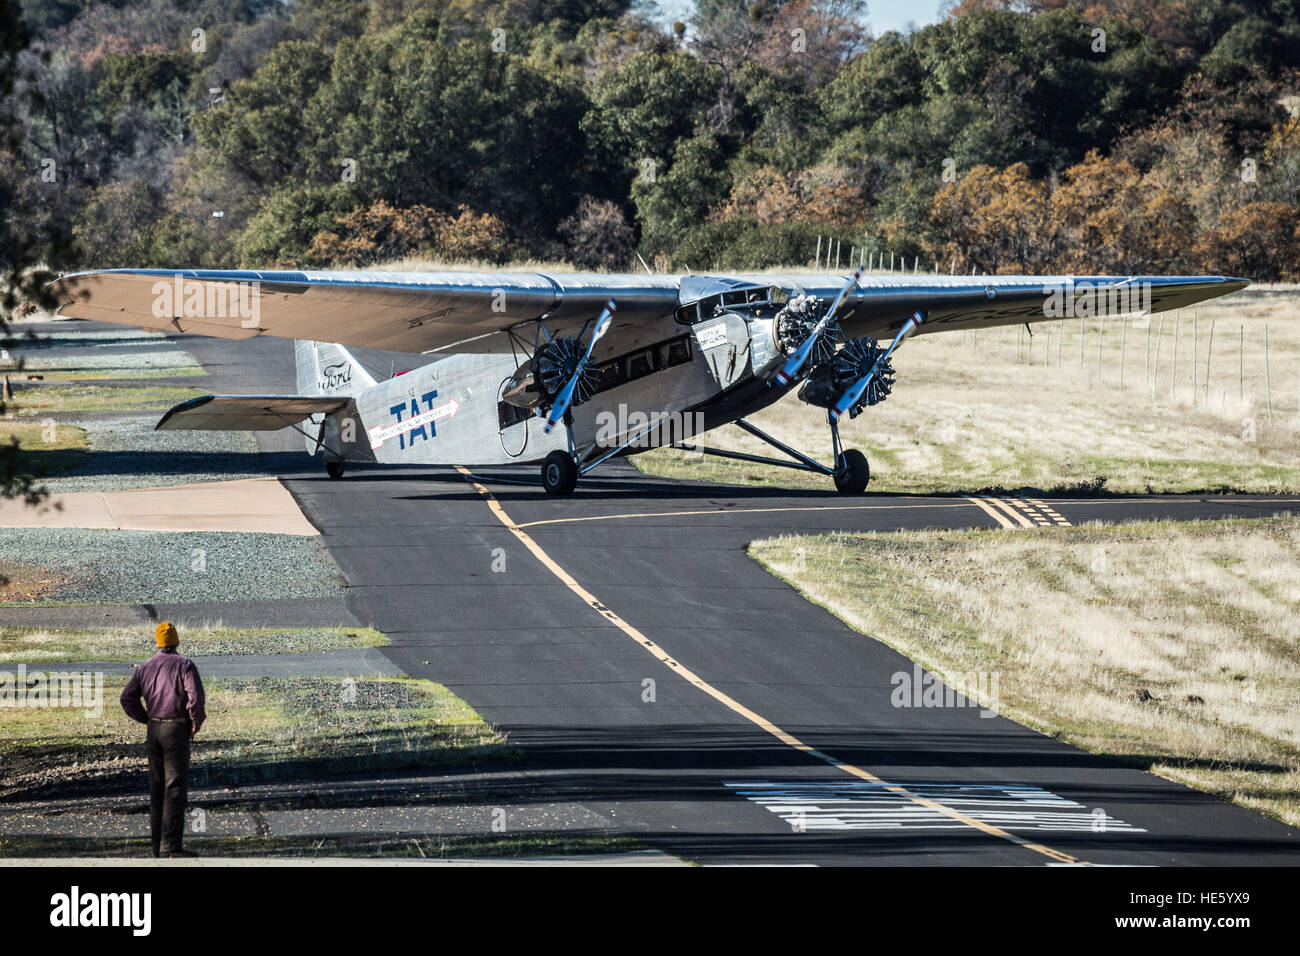 Groveland, California, USA. 17th Dec, 2016. Saturday, December 17, 2016.An unidentified man watches as a 1928 Ford Tri-Motor airplane lands at the Pine Mountain Lake Airport in Groveland, California.This Ford Tri-Motor NC9645, nicknamed The Tin Goose, has a wingspan of 77 feet 6 inches and was constructed in 1928. It was named the City of Wichita, and it was used to introduce the first coast-to-coast passenger air/rail service in the United States on July 7, 1929, and the development and inauguration of the first all air passenger service on October 25, 1930. The plane can carry up to 1 Stock Photo